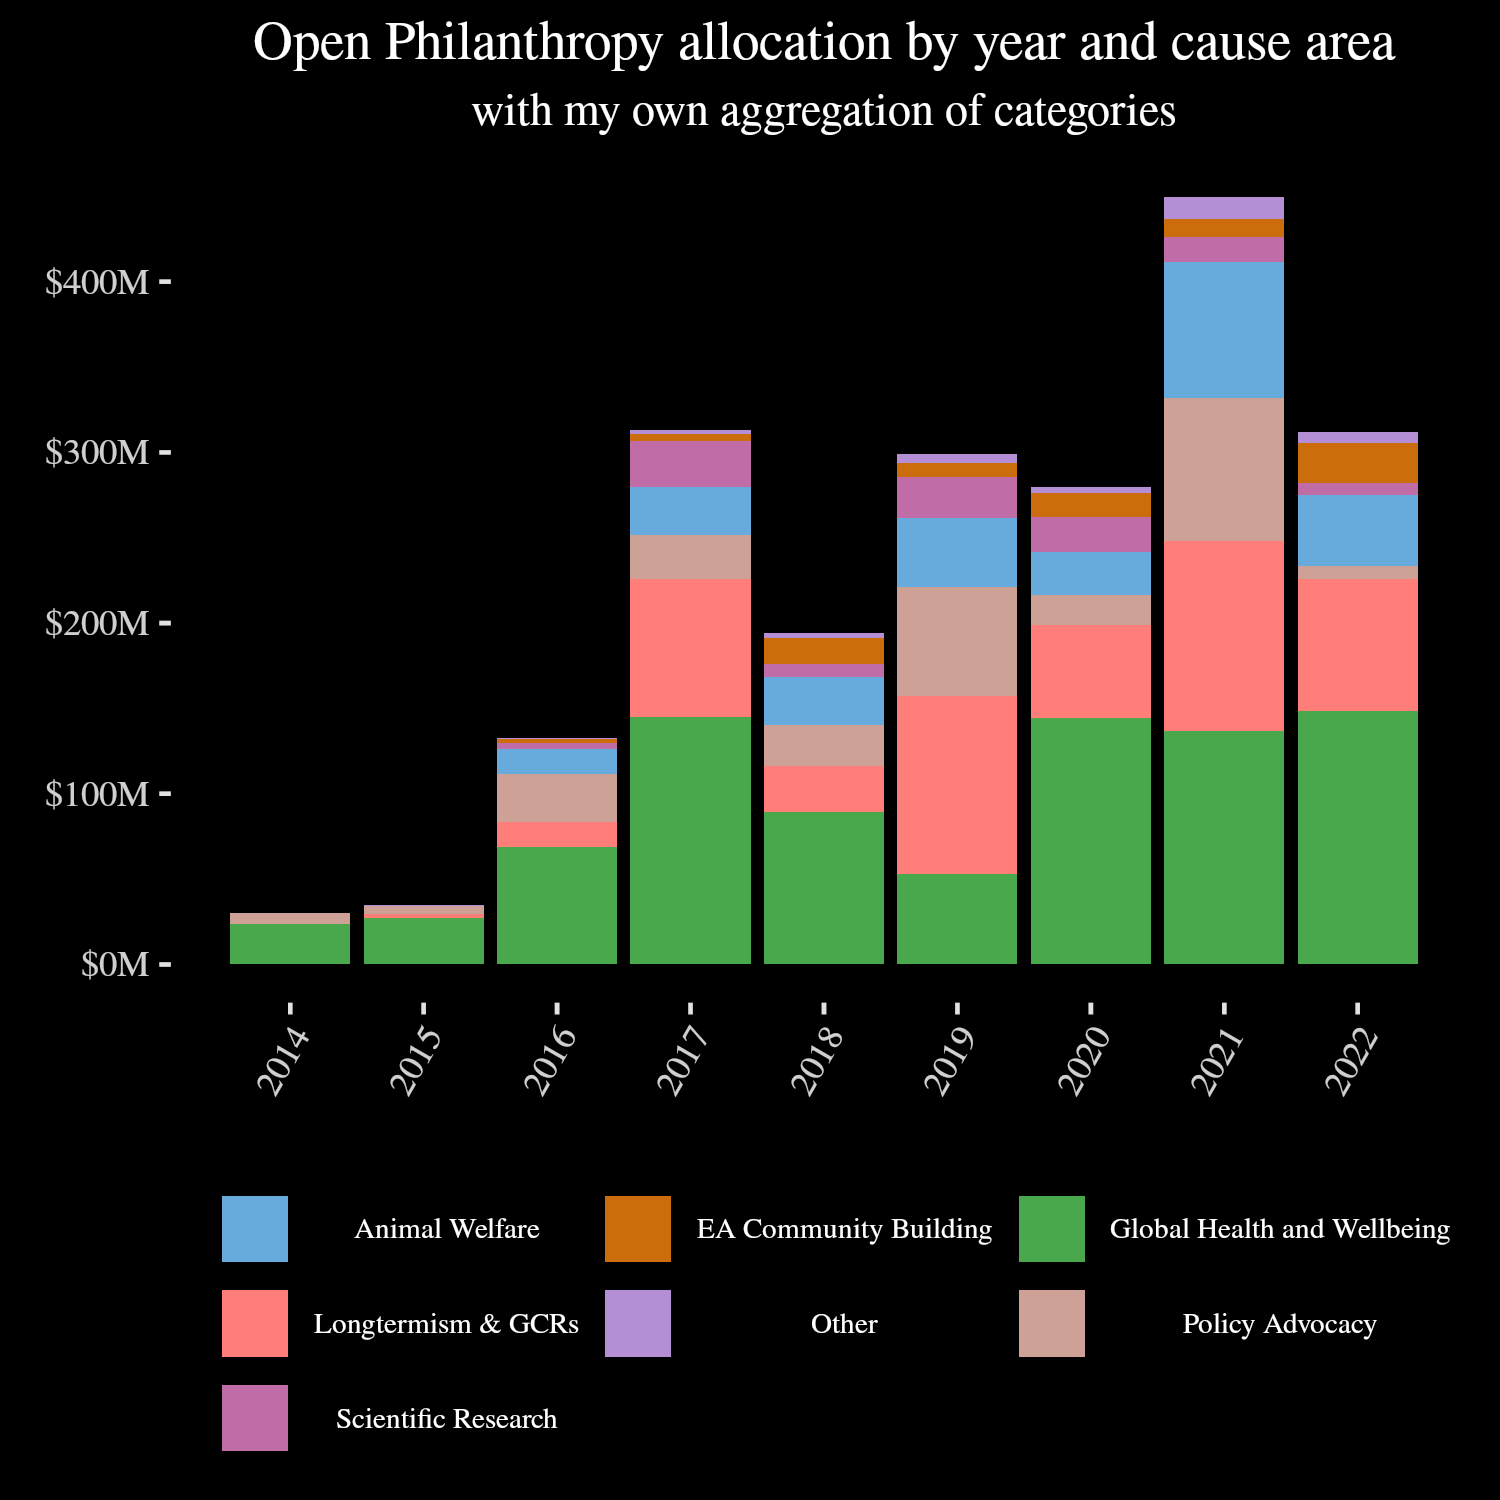 Bar graph of OpenPhil allocation by year. Global health leads for most years. Catastrophic risks are usually second since 2017. Overall spend increases over time.